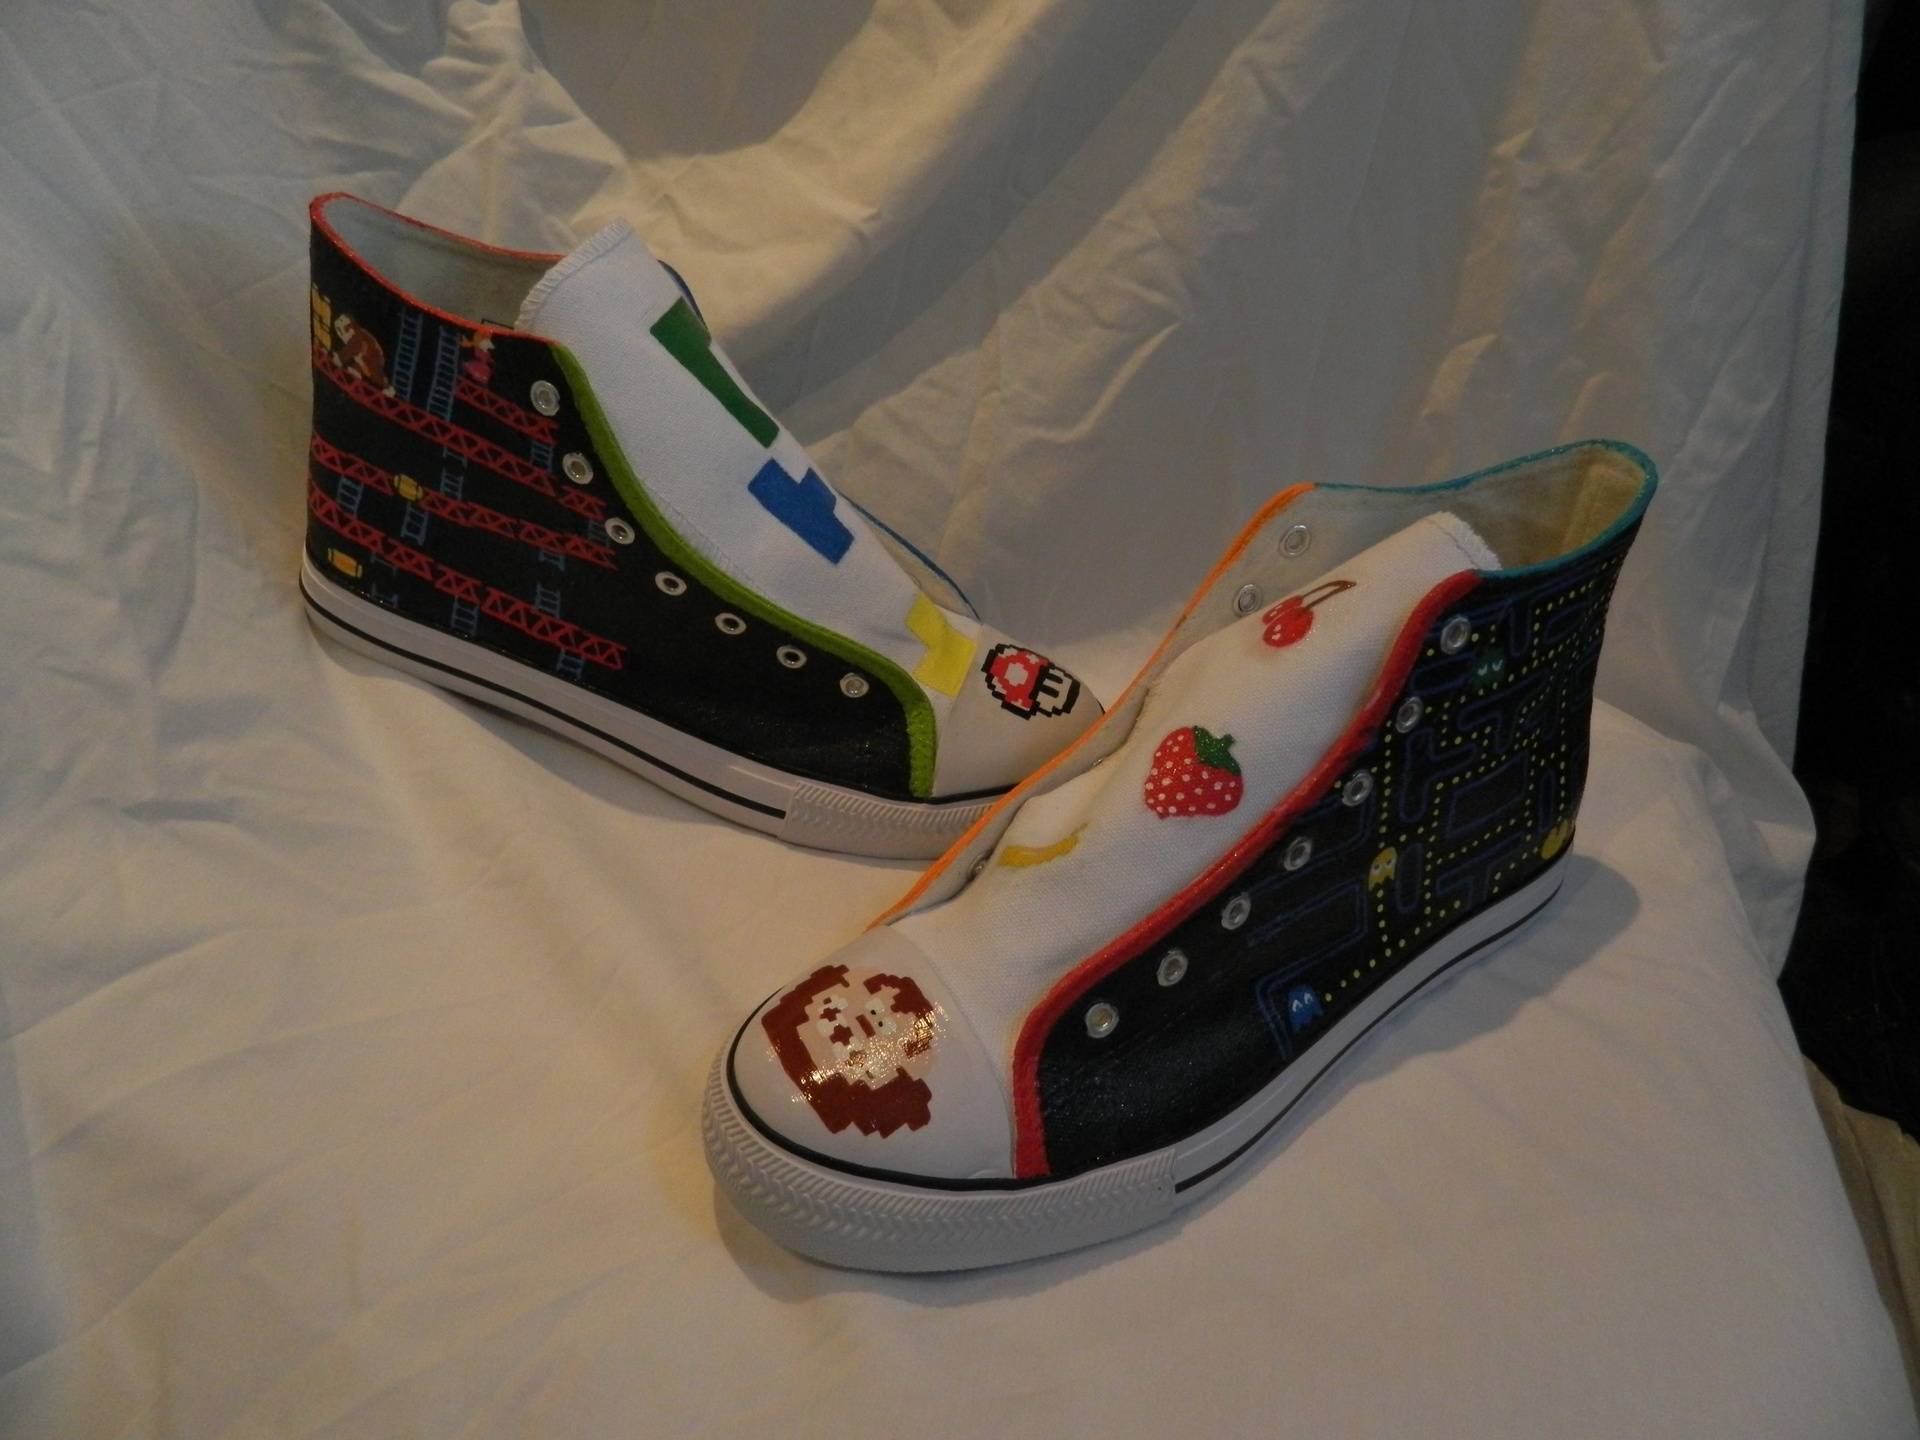 Other sides of handpainted retro gamer boots